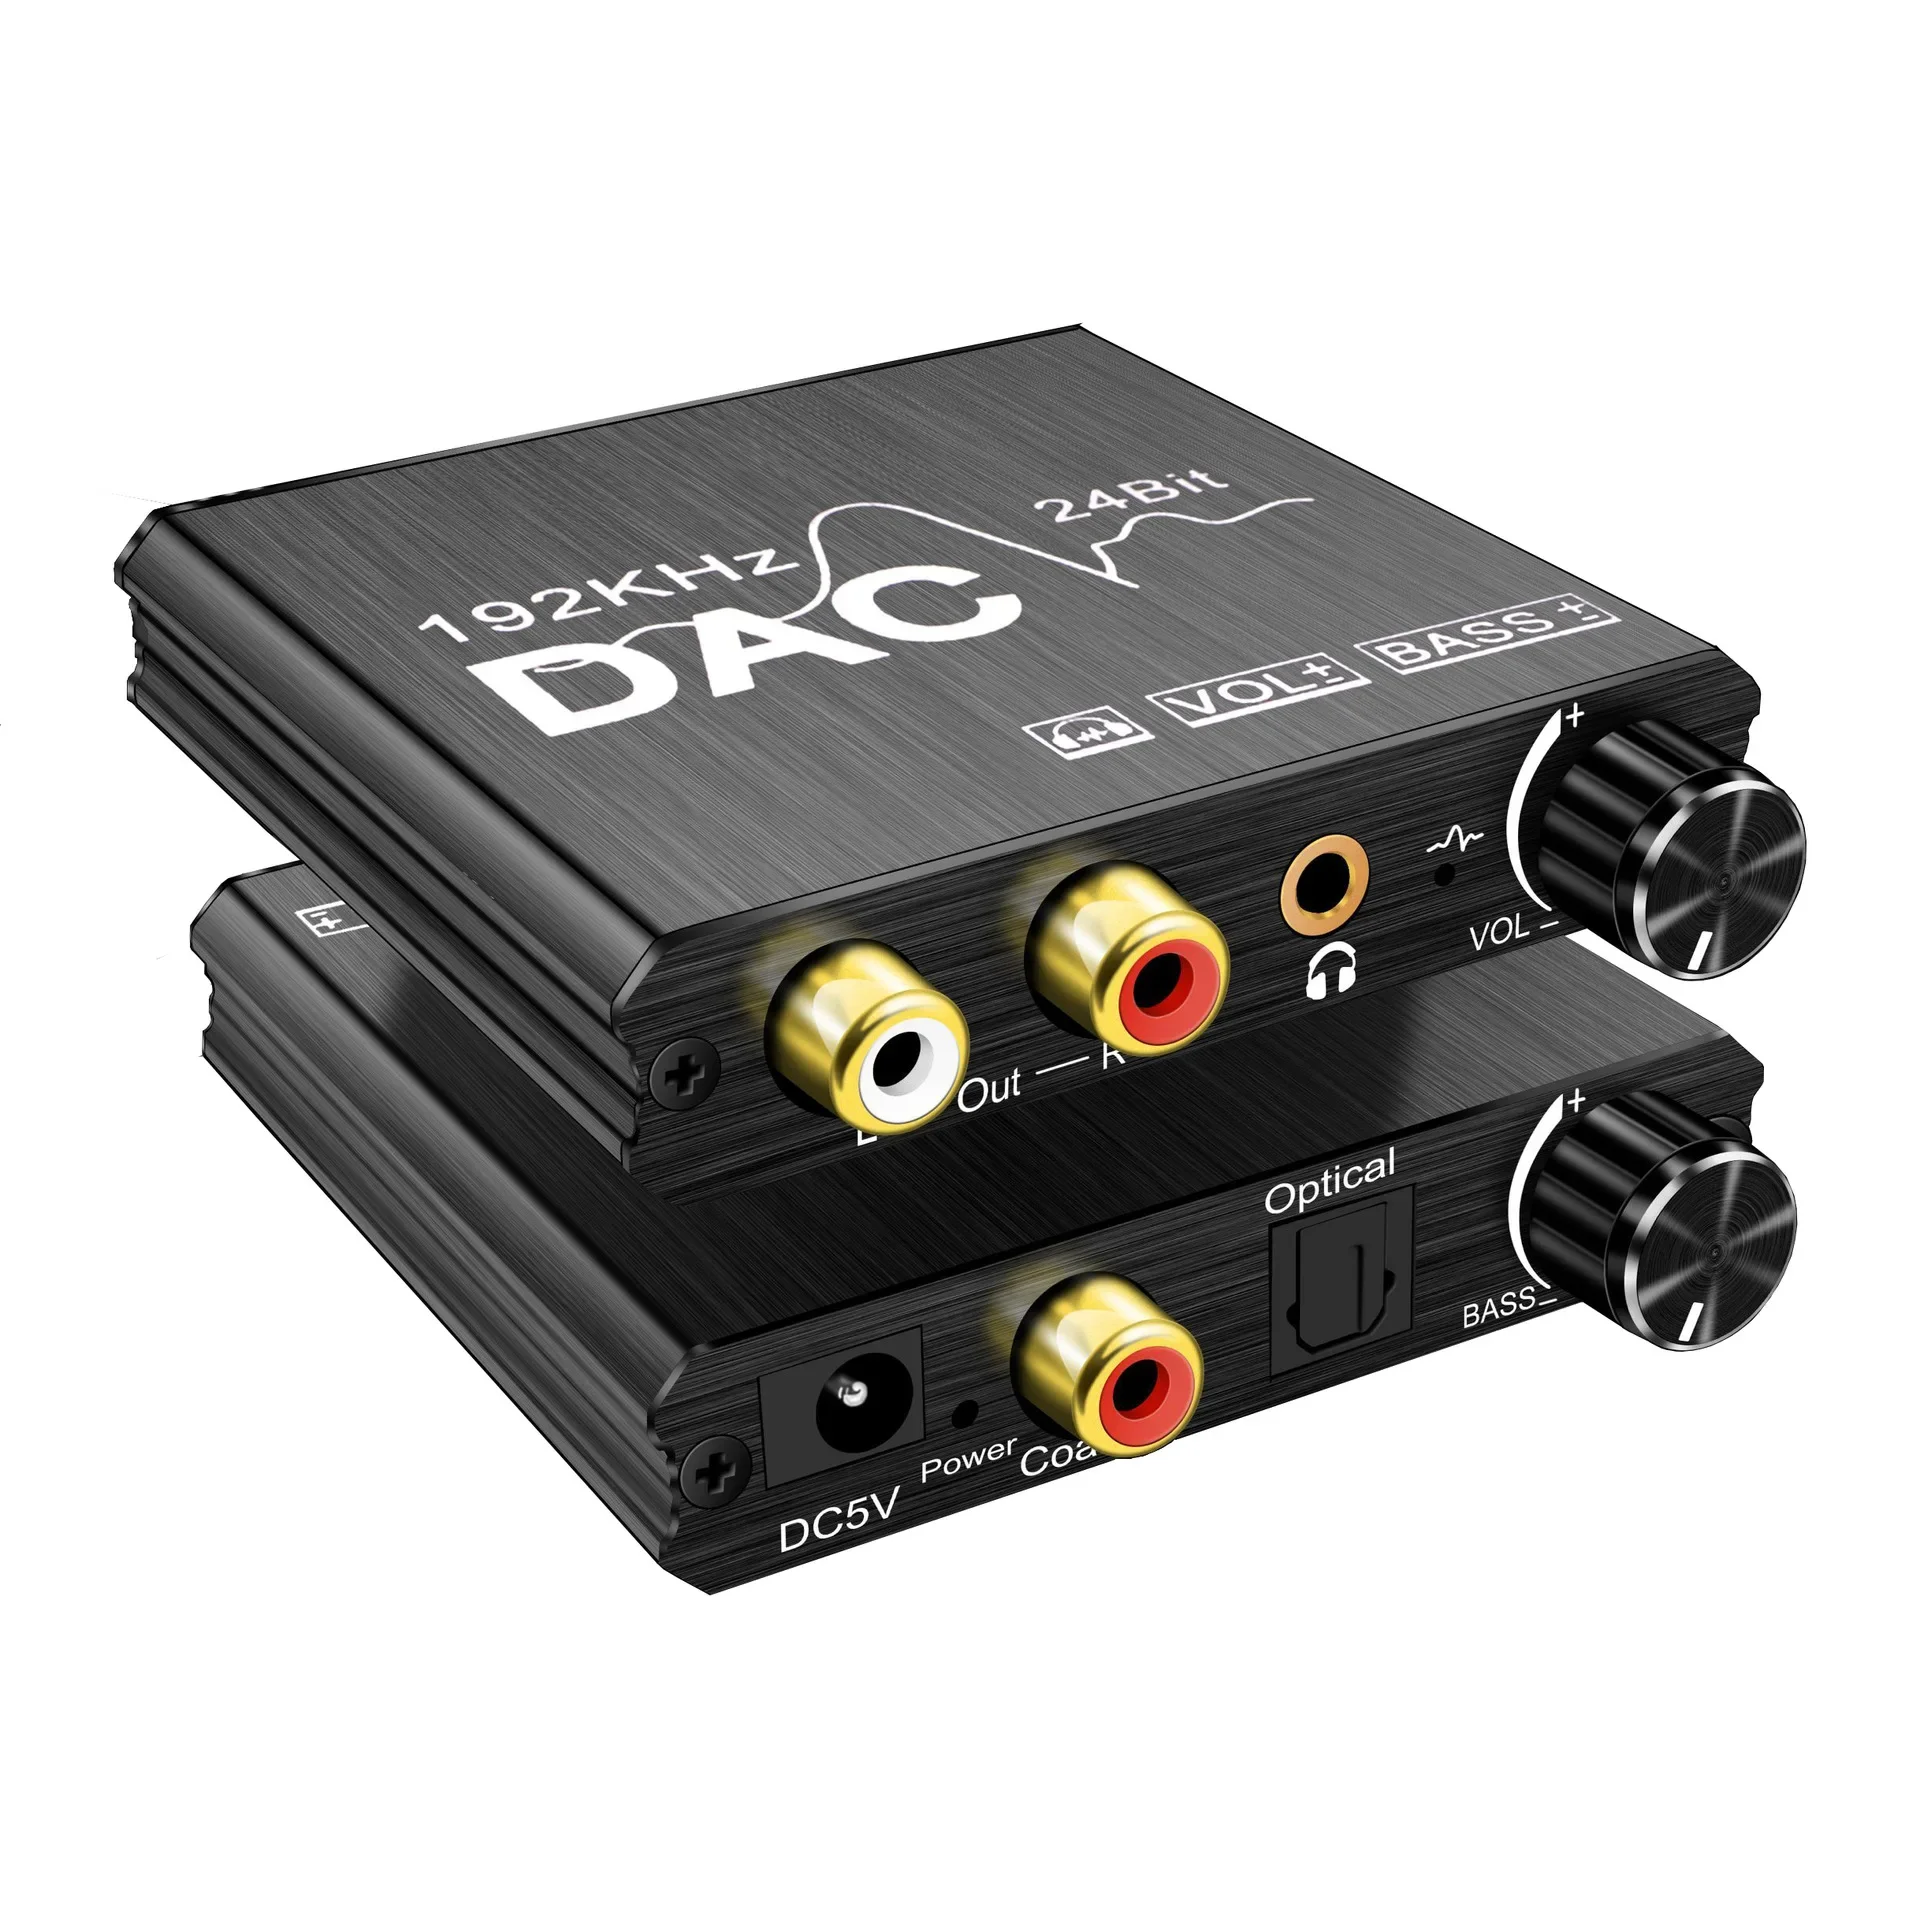 

24bit DAC Digital To Analog R/L Audio Converter Optical Toslink SPDIF Coaxial To RCA 3.5mm Jack Adapter Support PCM /LPCM